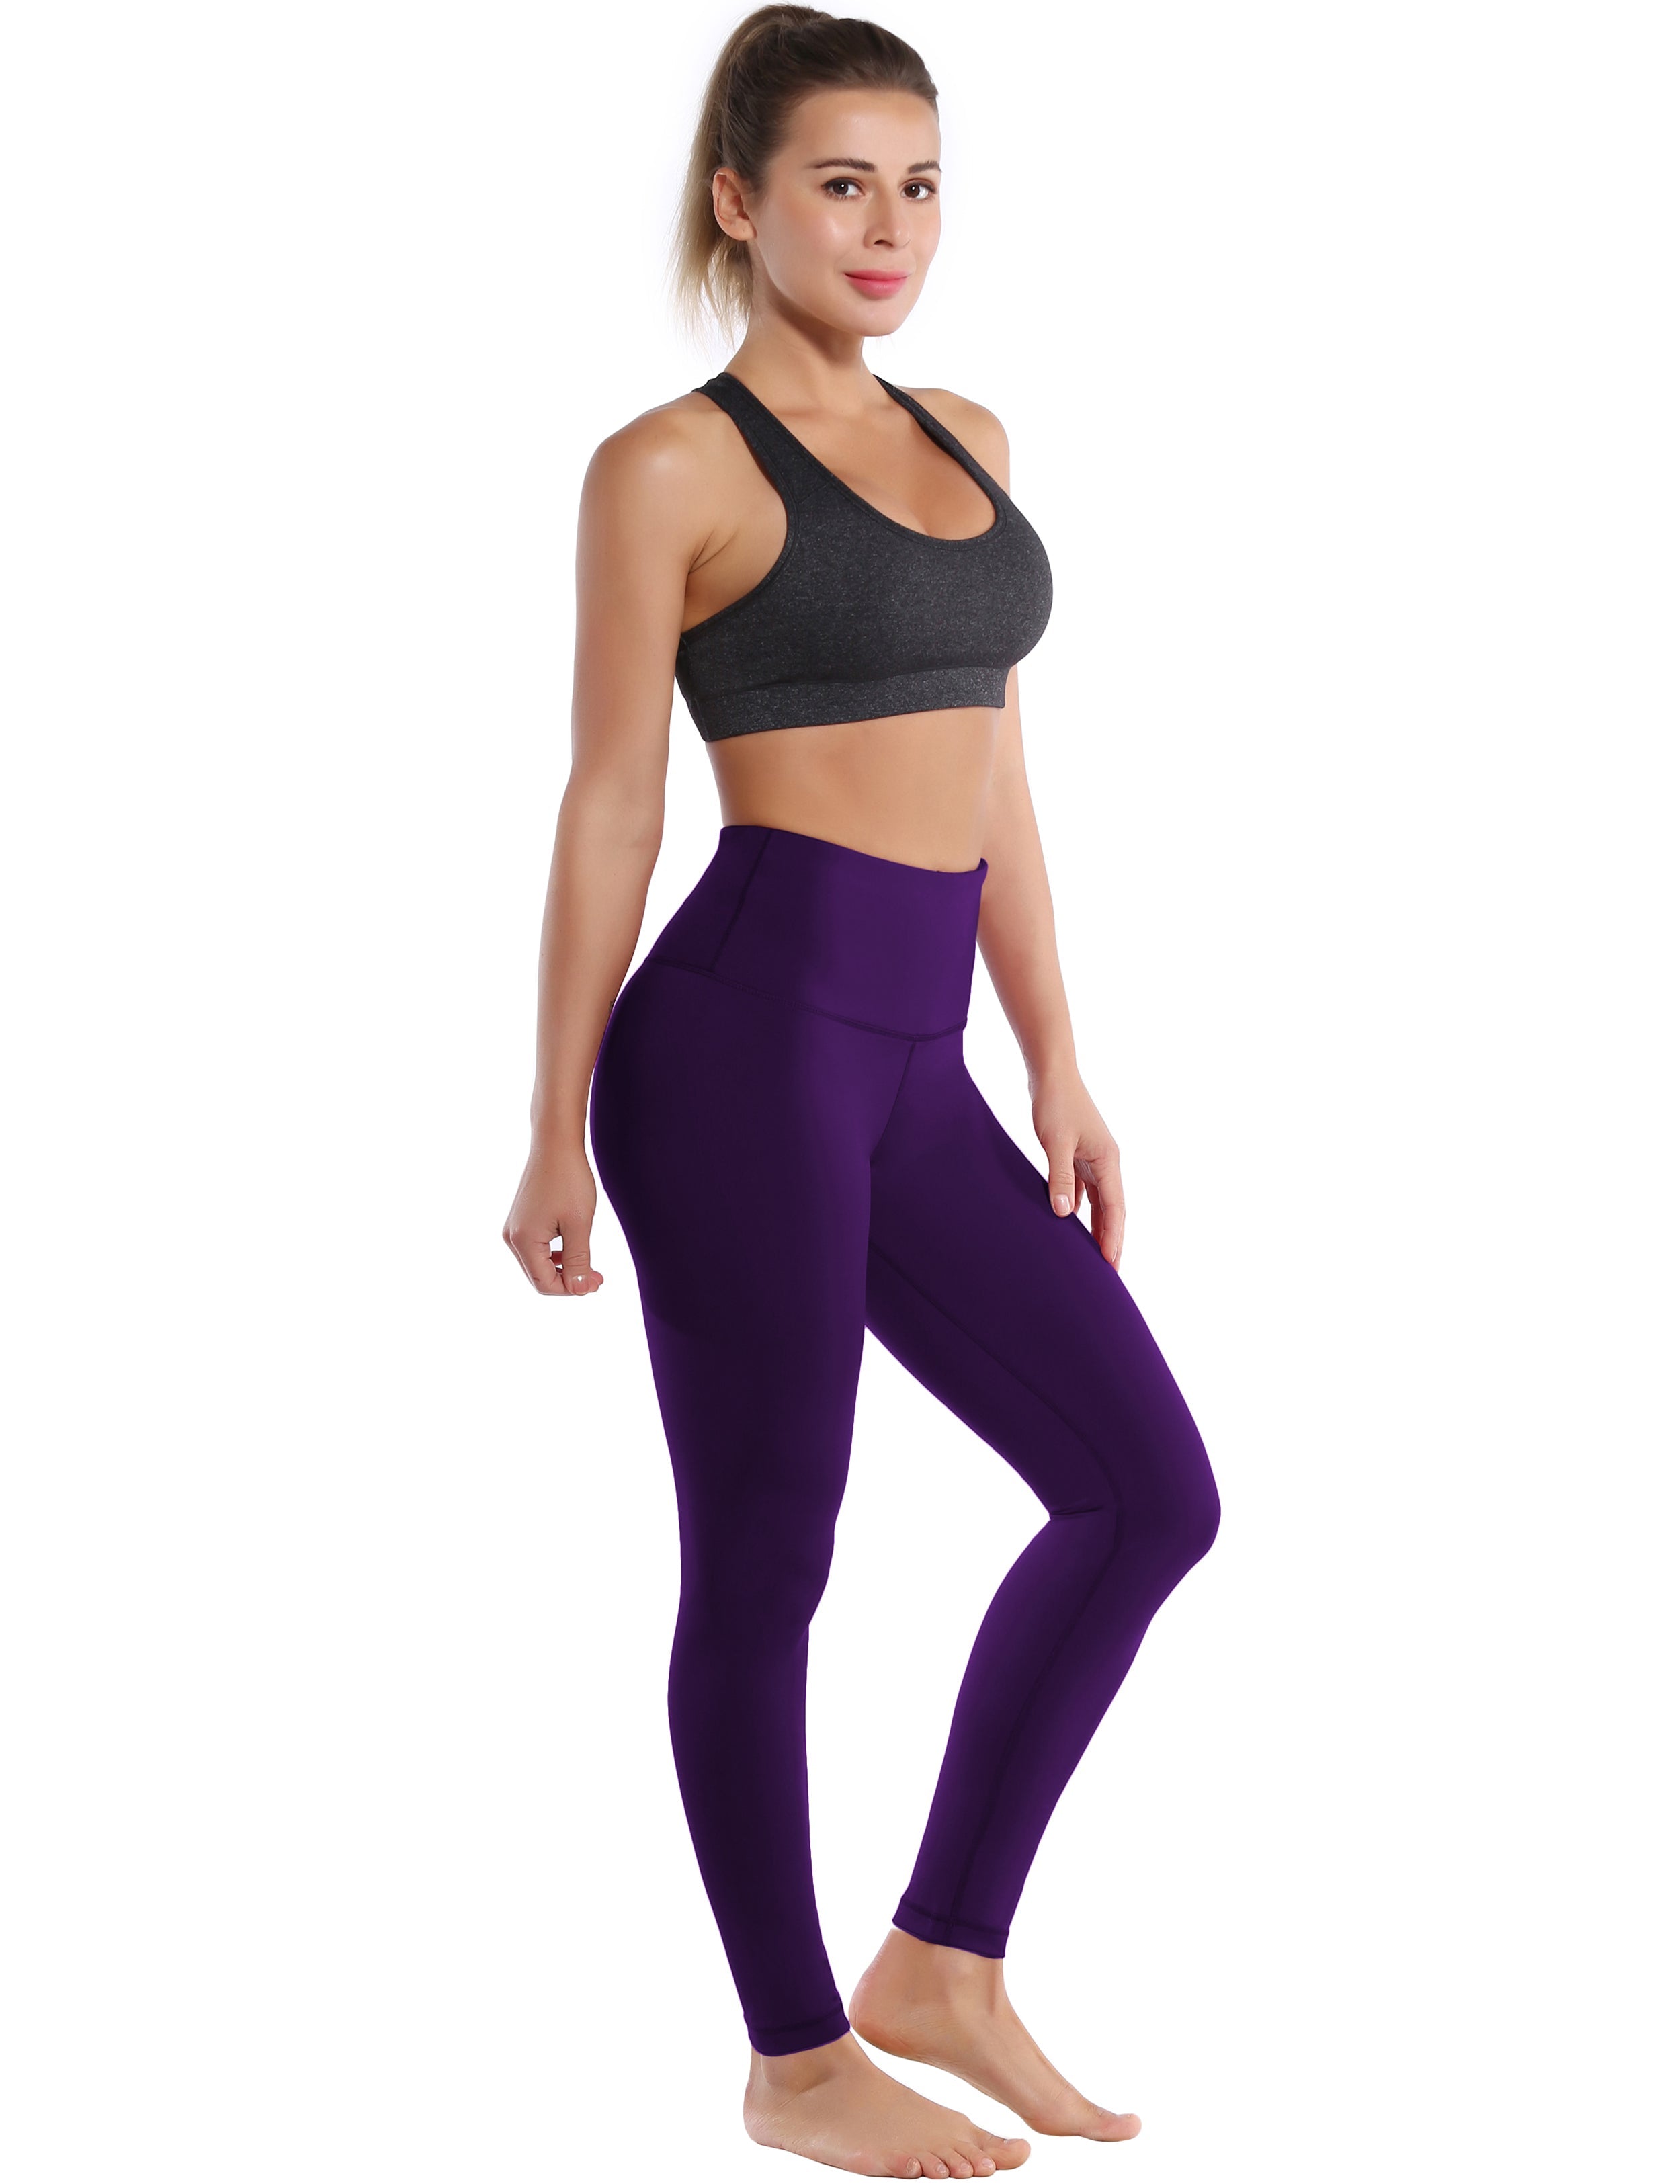 High Waist Running Pants eggplantpurple 75%Nylon/25%Spandex Fabric doesn't attract lint easily 4-way stretch No see-through Moisture-wicking Tummy control Inner pocket Four lengths